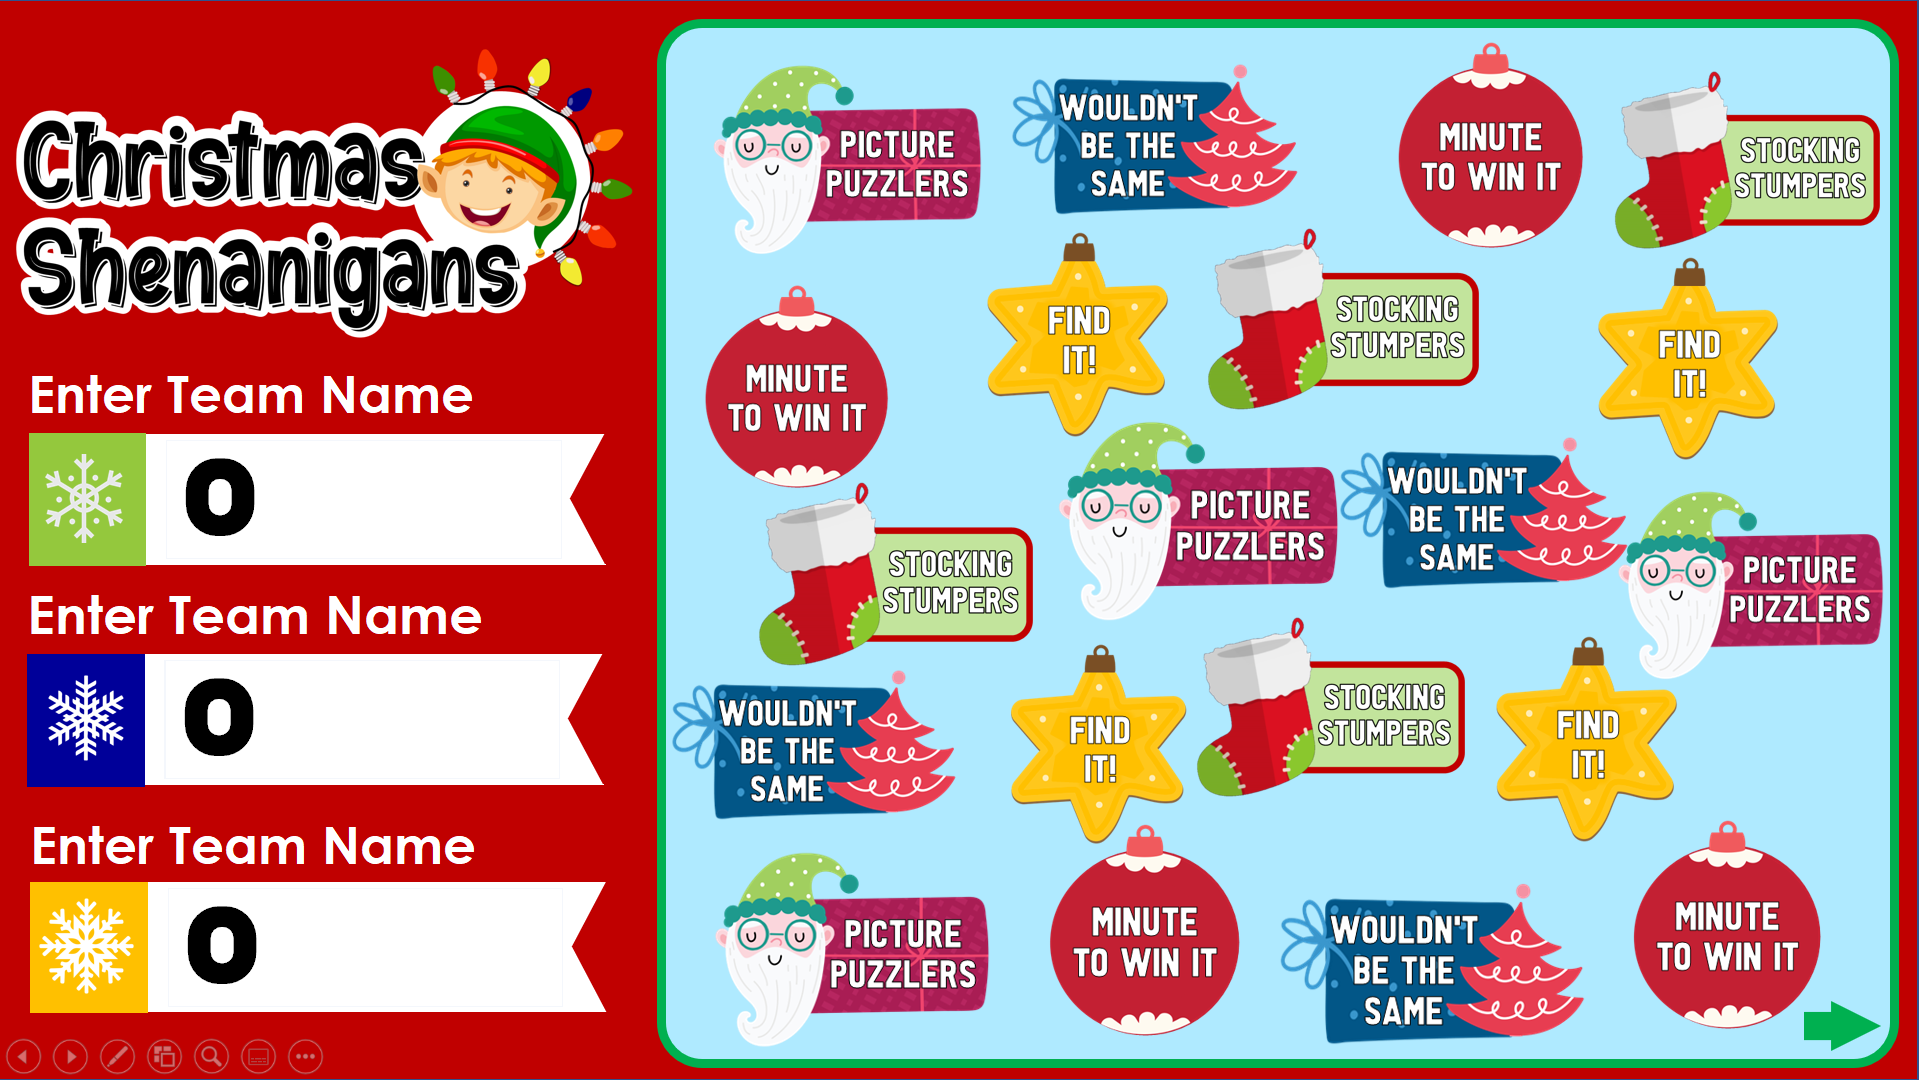 Throw Your Own Christmas Party Game Show this Holiday Season!